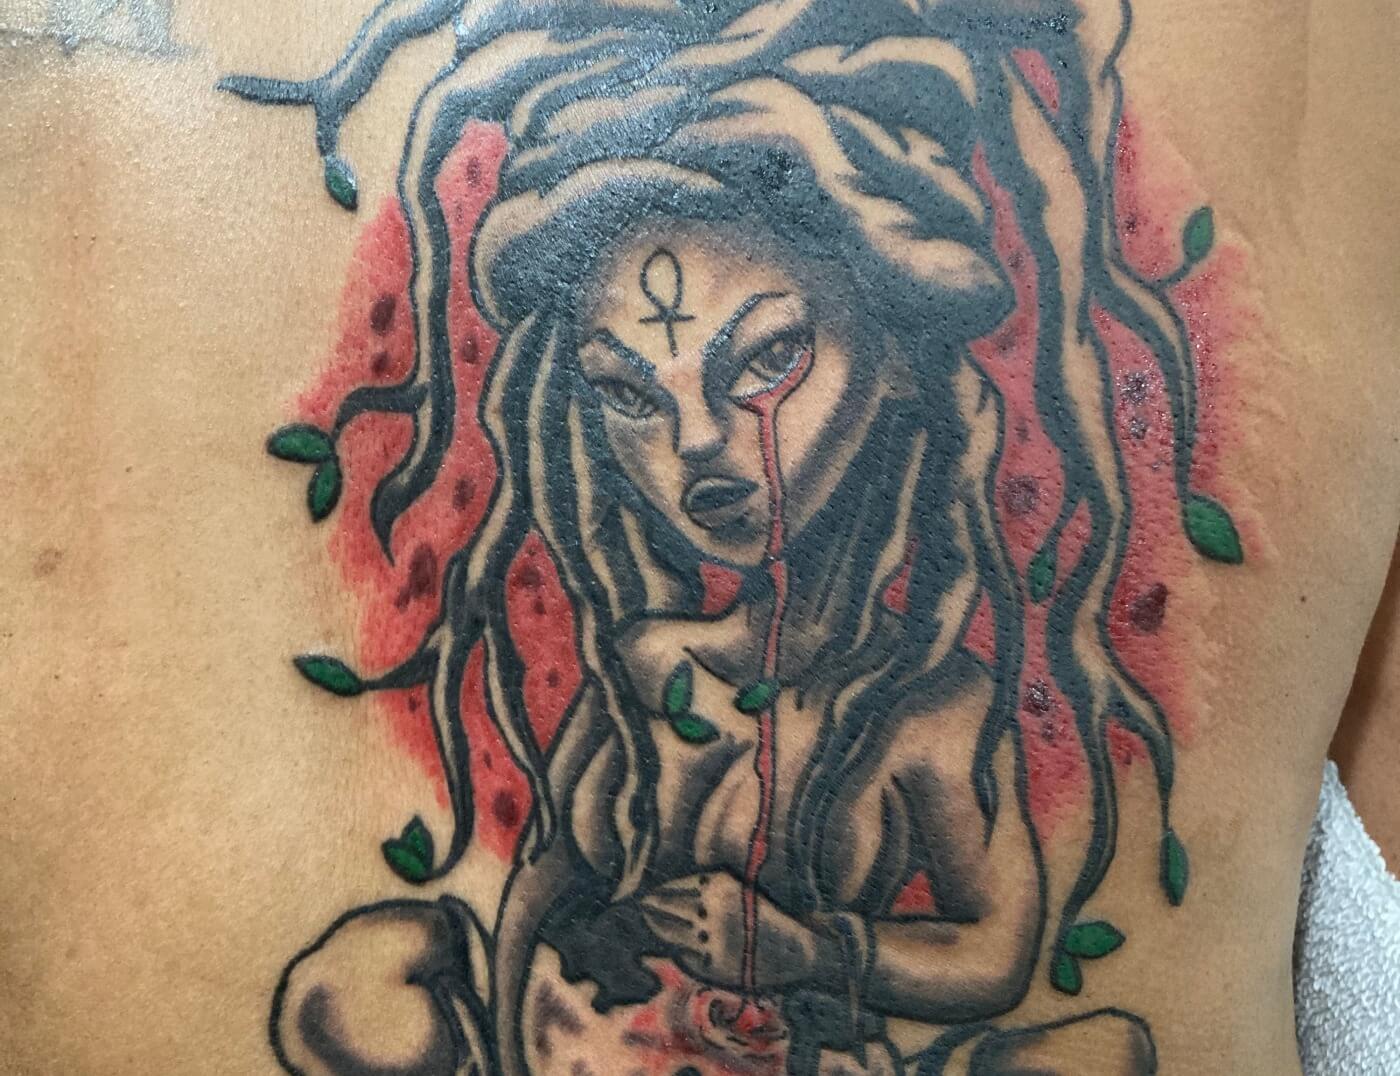 "Mother Nature Funk" Tattoo By Funk Tha World At Iron Palm Tattoos. Call 404-973-7828 or stop by for a free consultation with Funk.